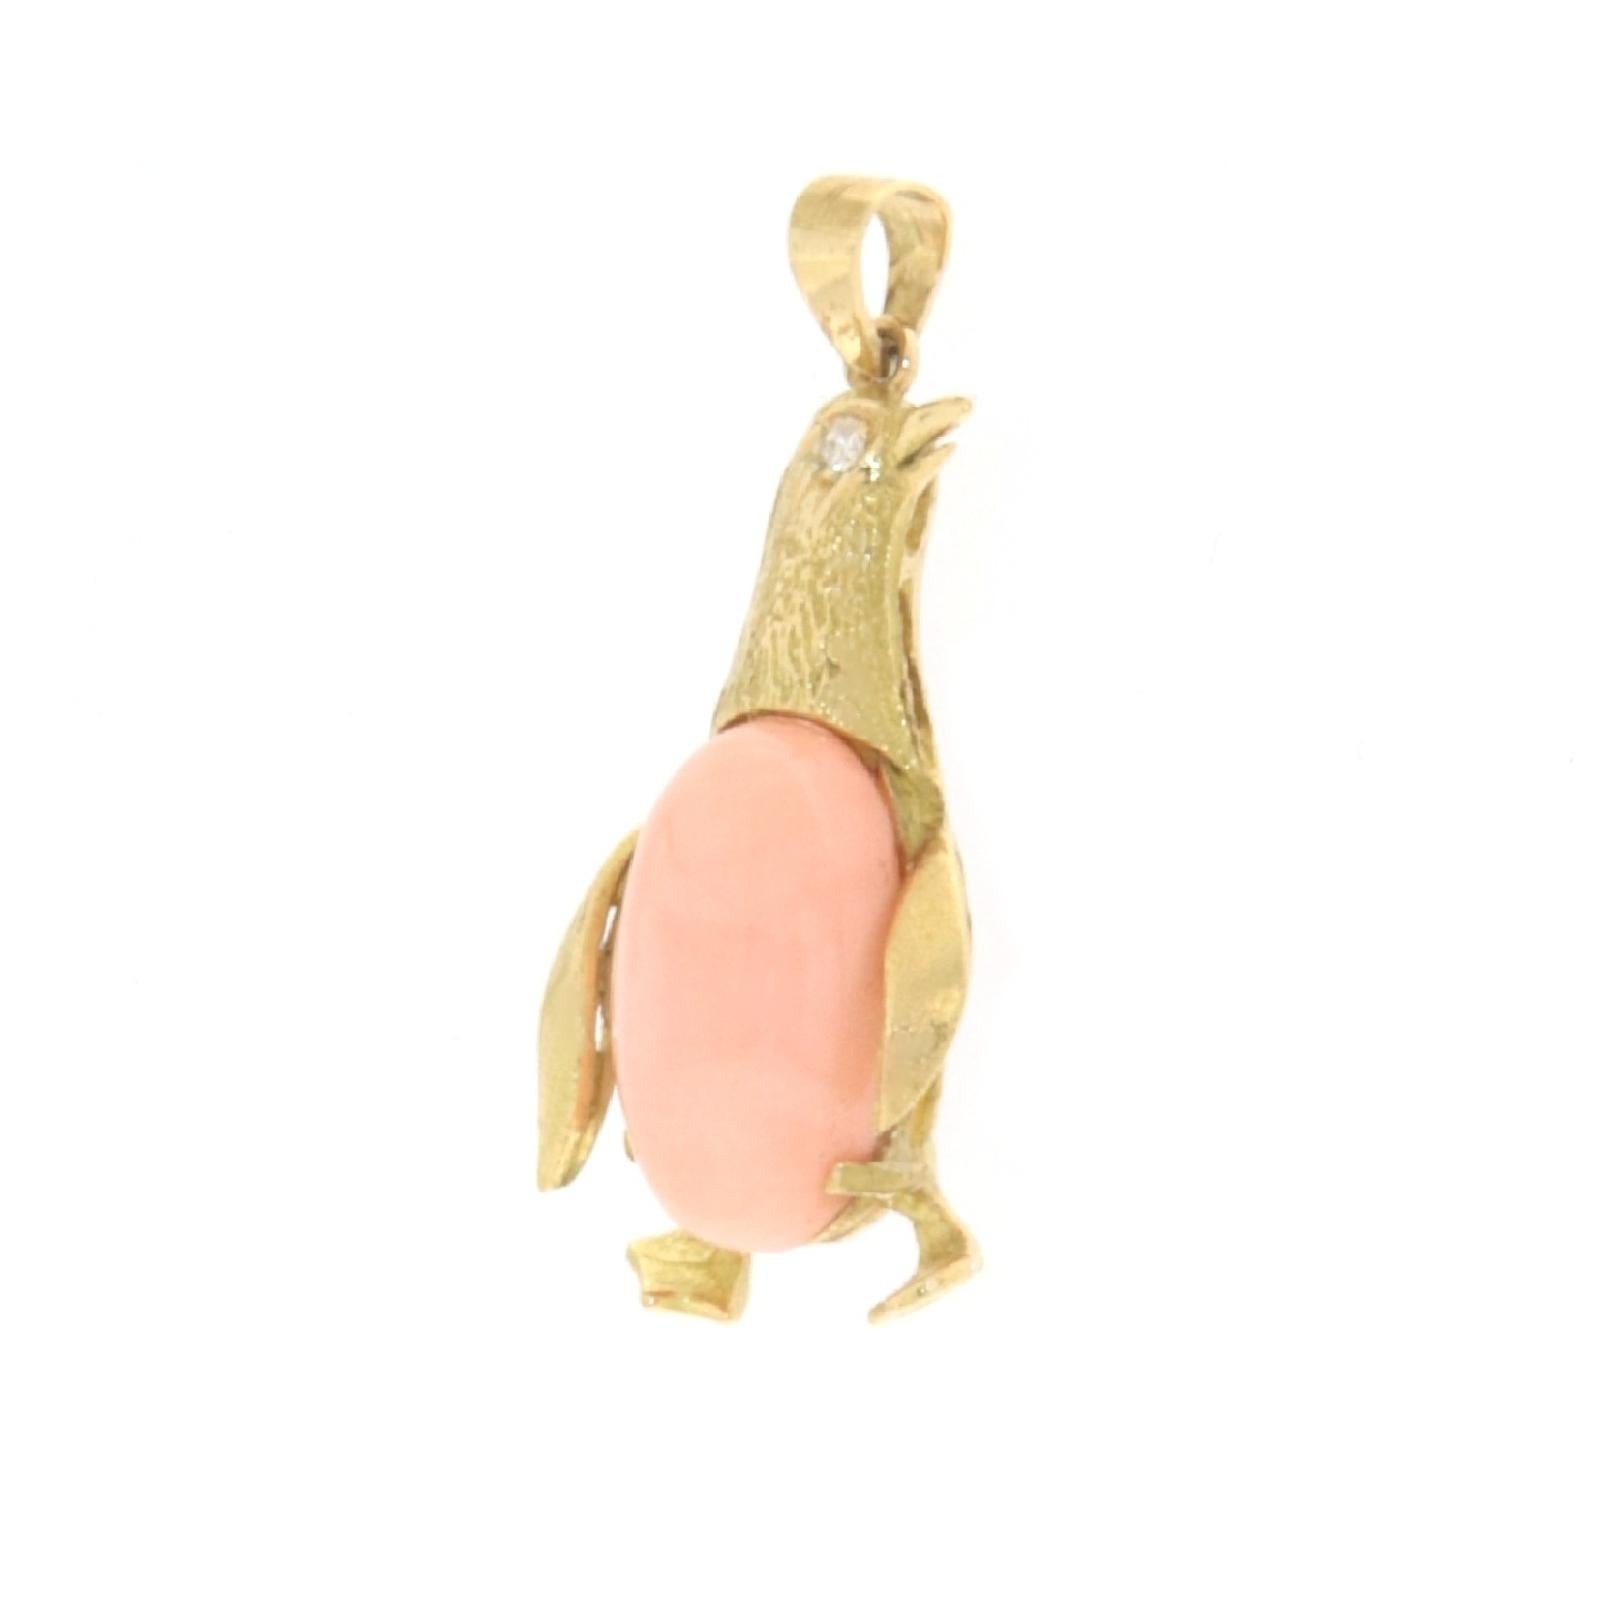 This charming penguin-shaped pendant in 18-karat yellow gold is a true celebration of craftsmanship and creativity. Perfectly crafted to capture the playful essence and grace of one of the most fascinating inhabitants of the South Pole, this pendant